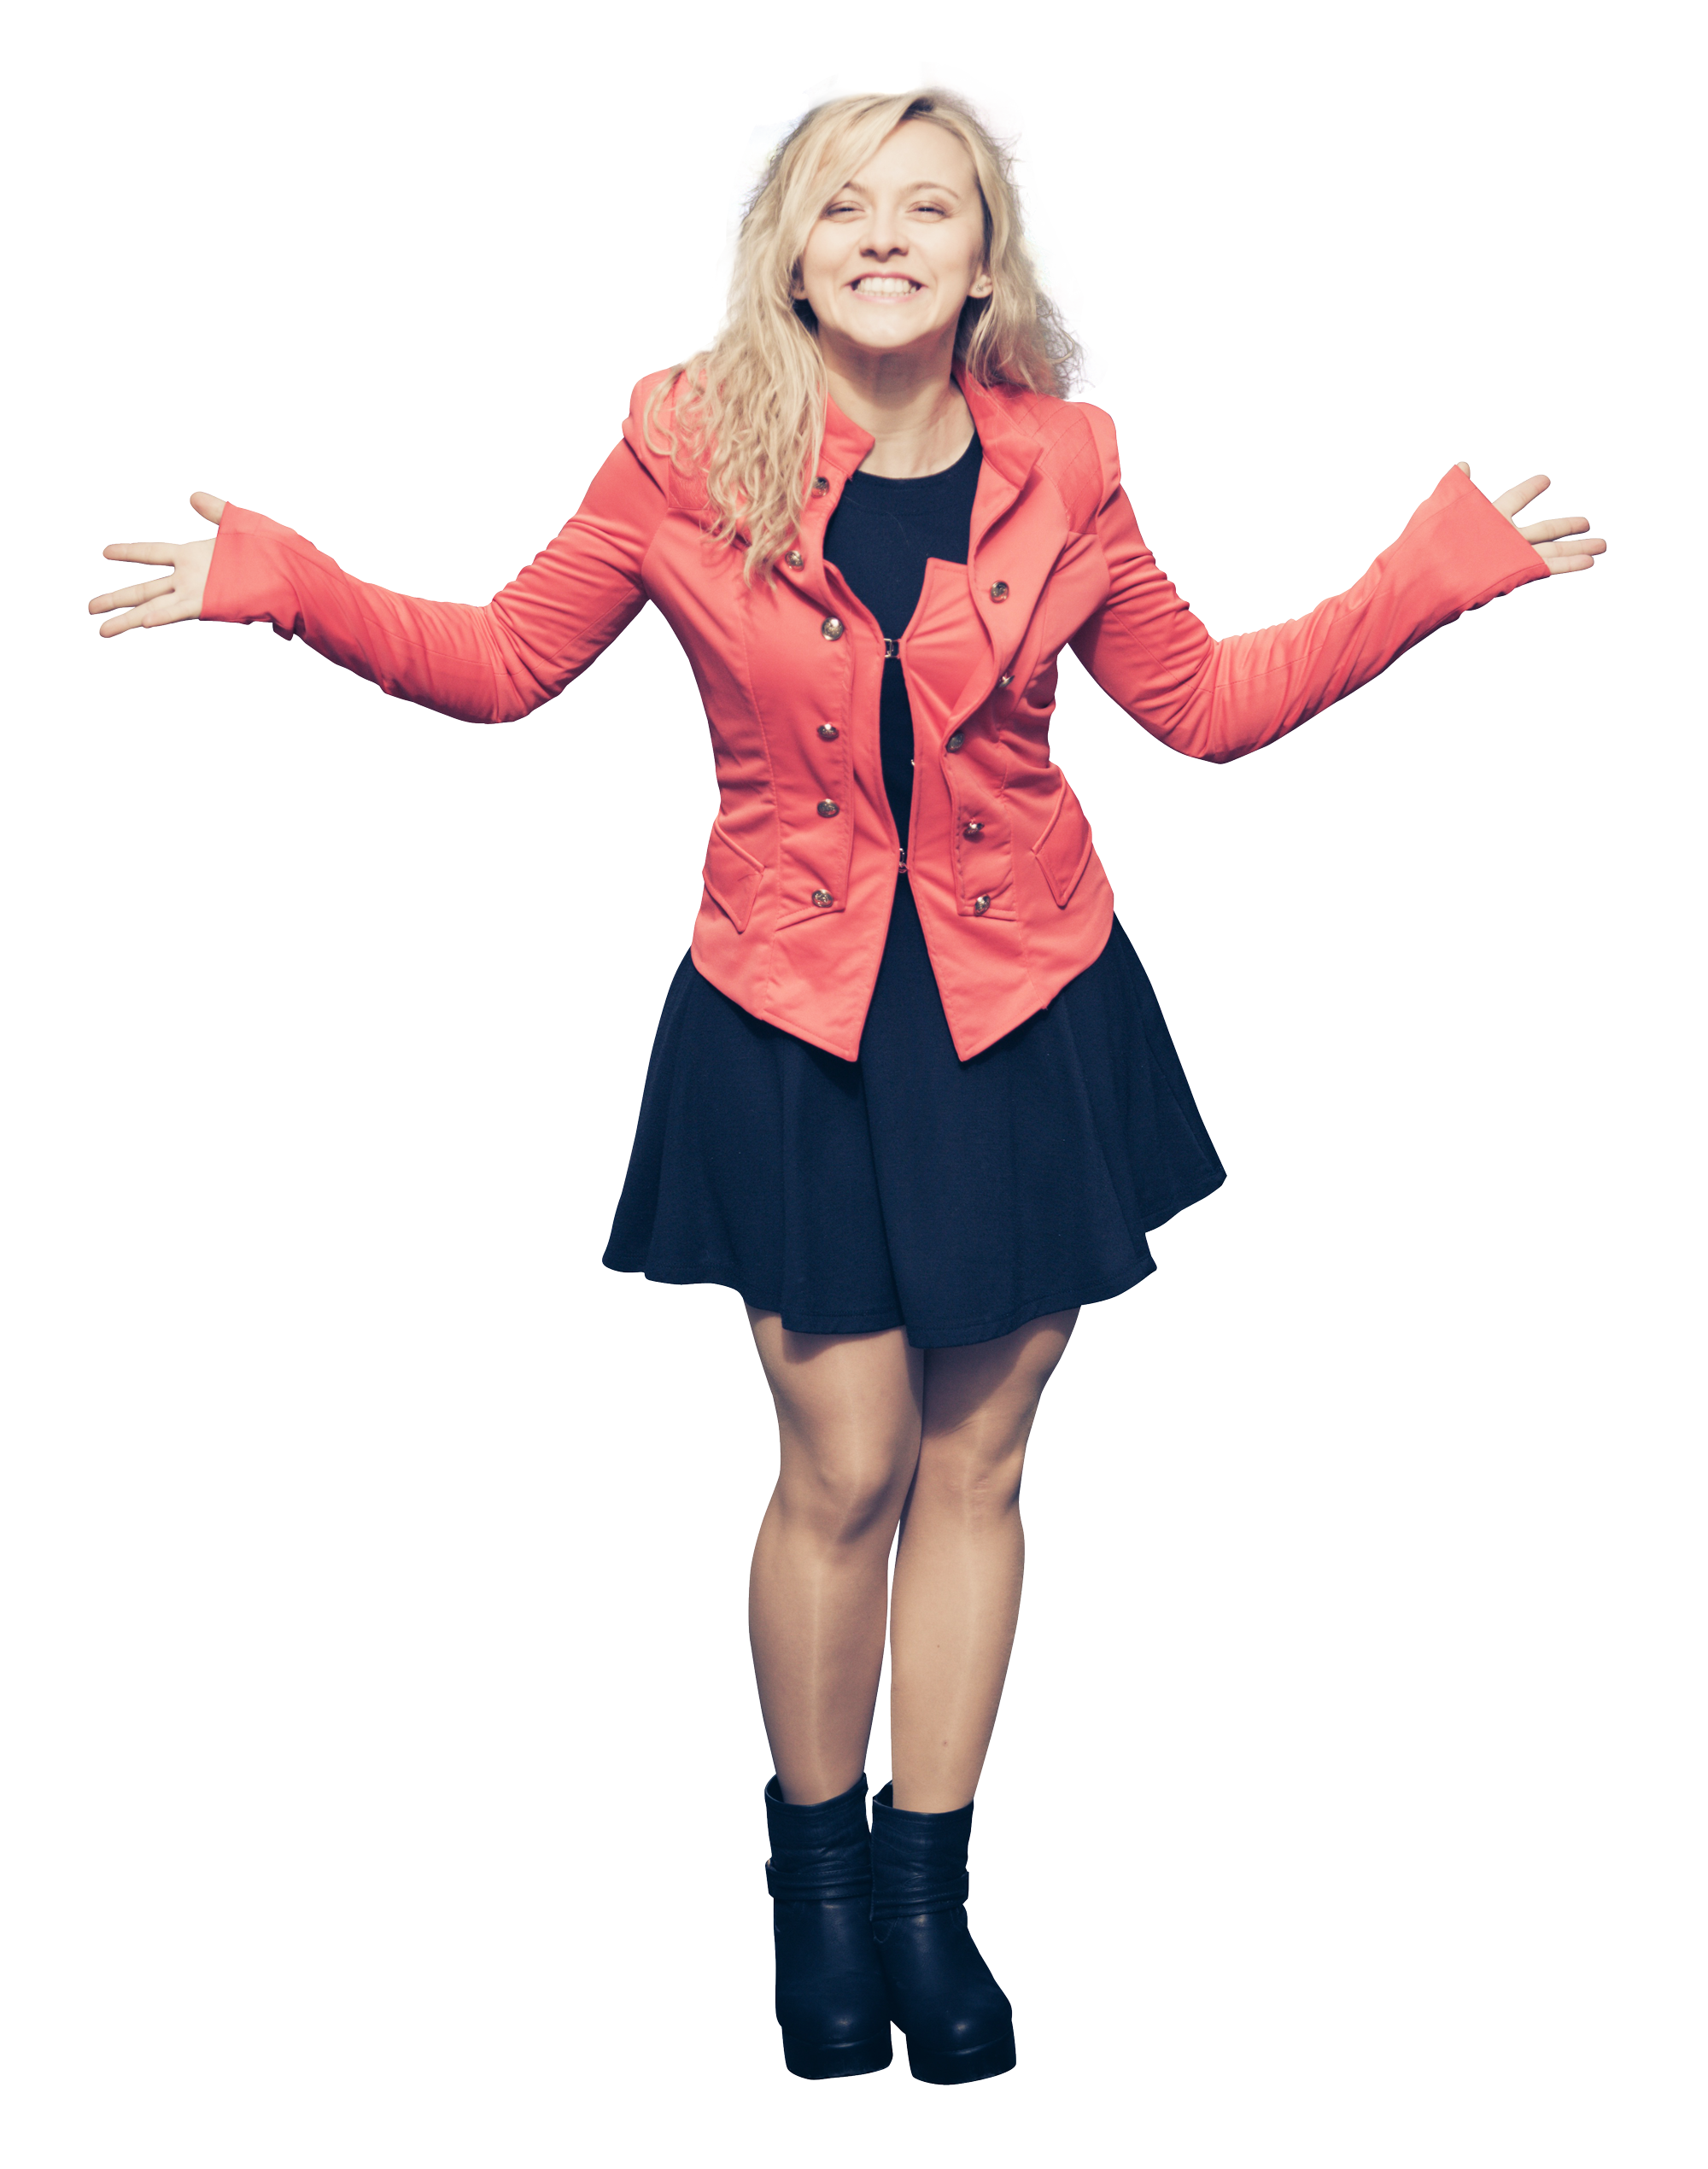 Happy Girl Transparent Images PNG